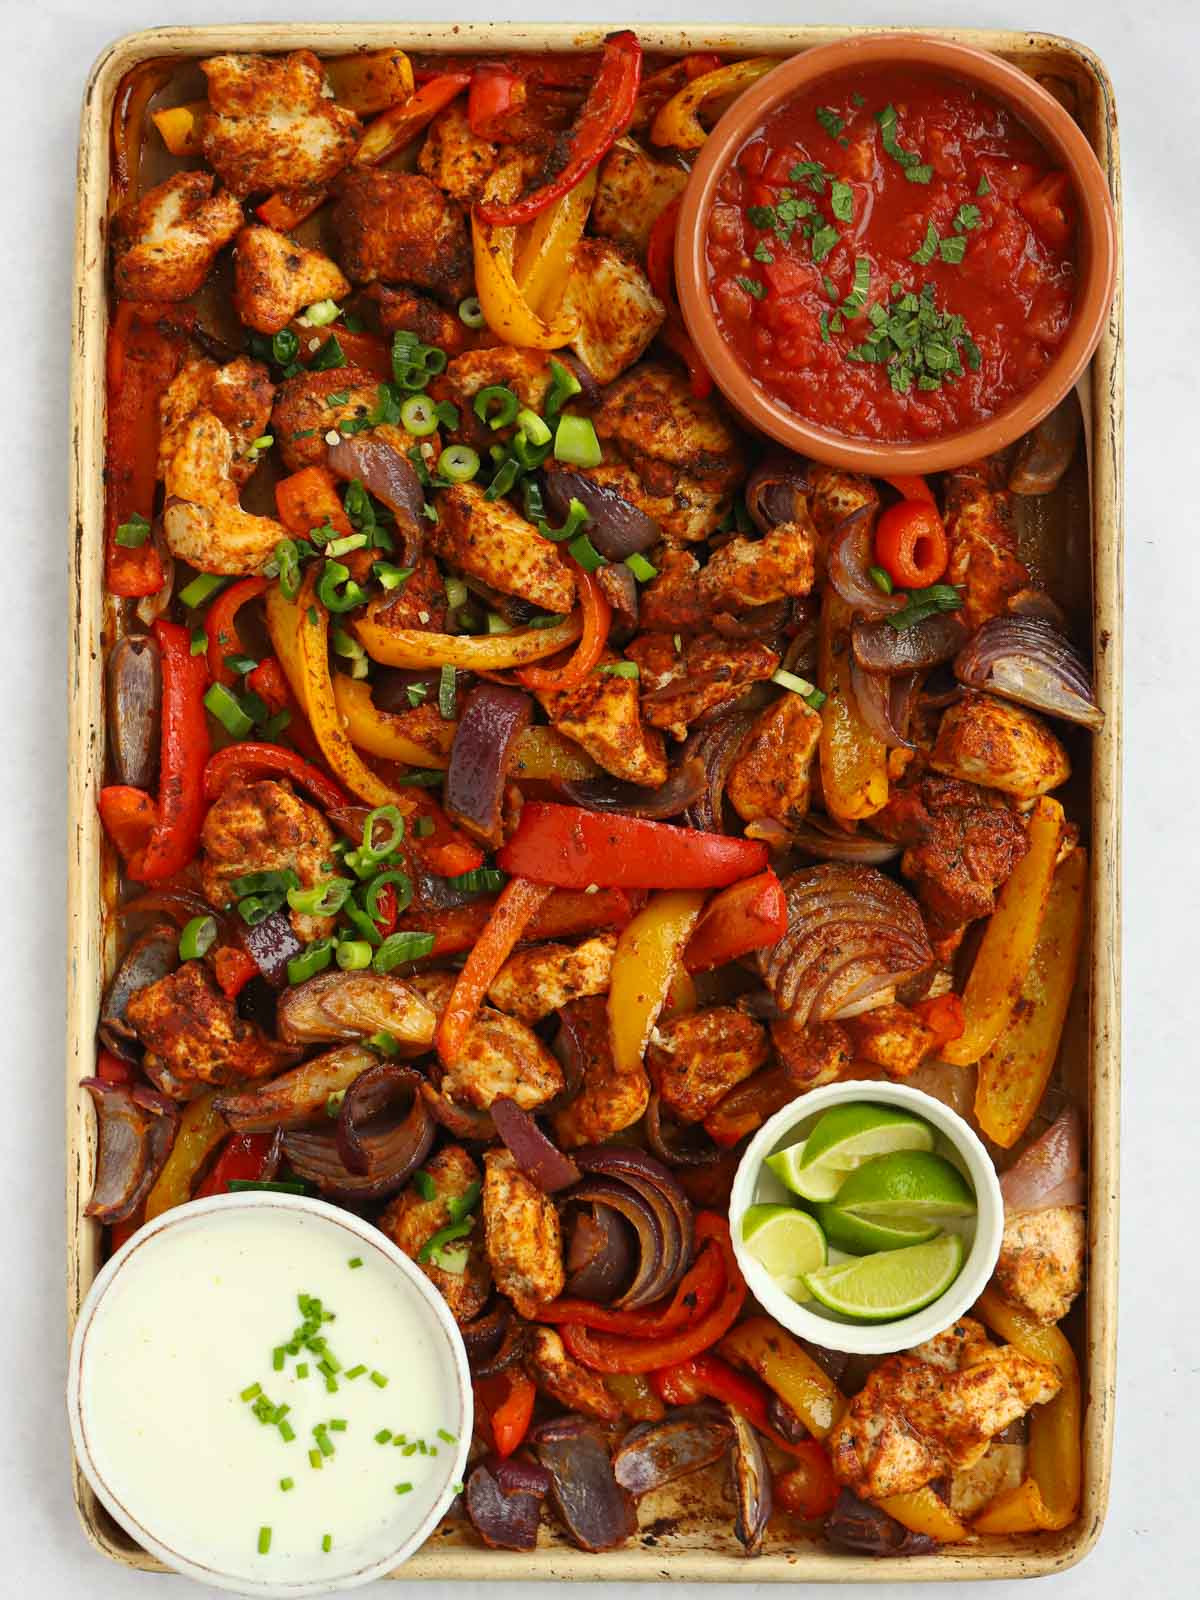 A tray with oven baked chicken fajitas, with side dishes in bowls of salsa, sour cream and lime.